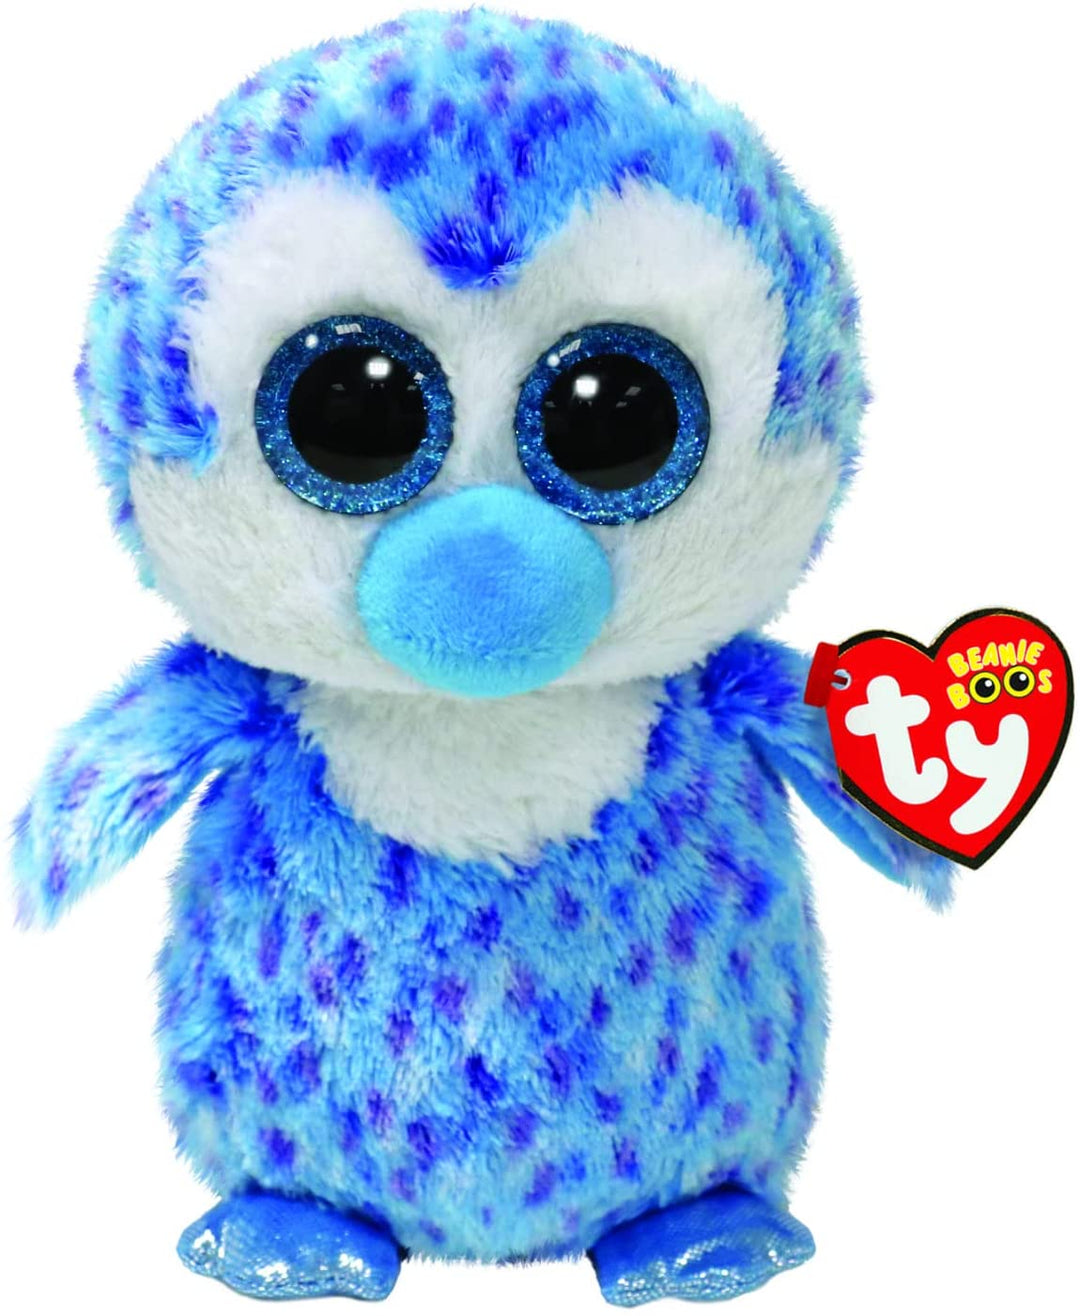 Ty Beanie Boos Tony Penguin 6" | Beanie Baby Soft Plush Toy | Collectible Cuddly